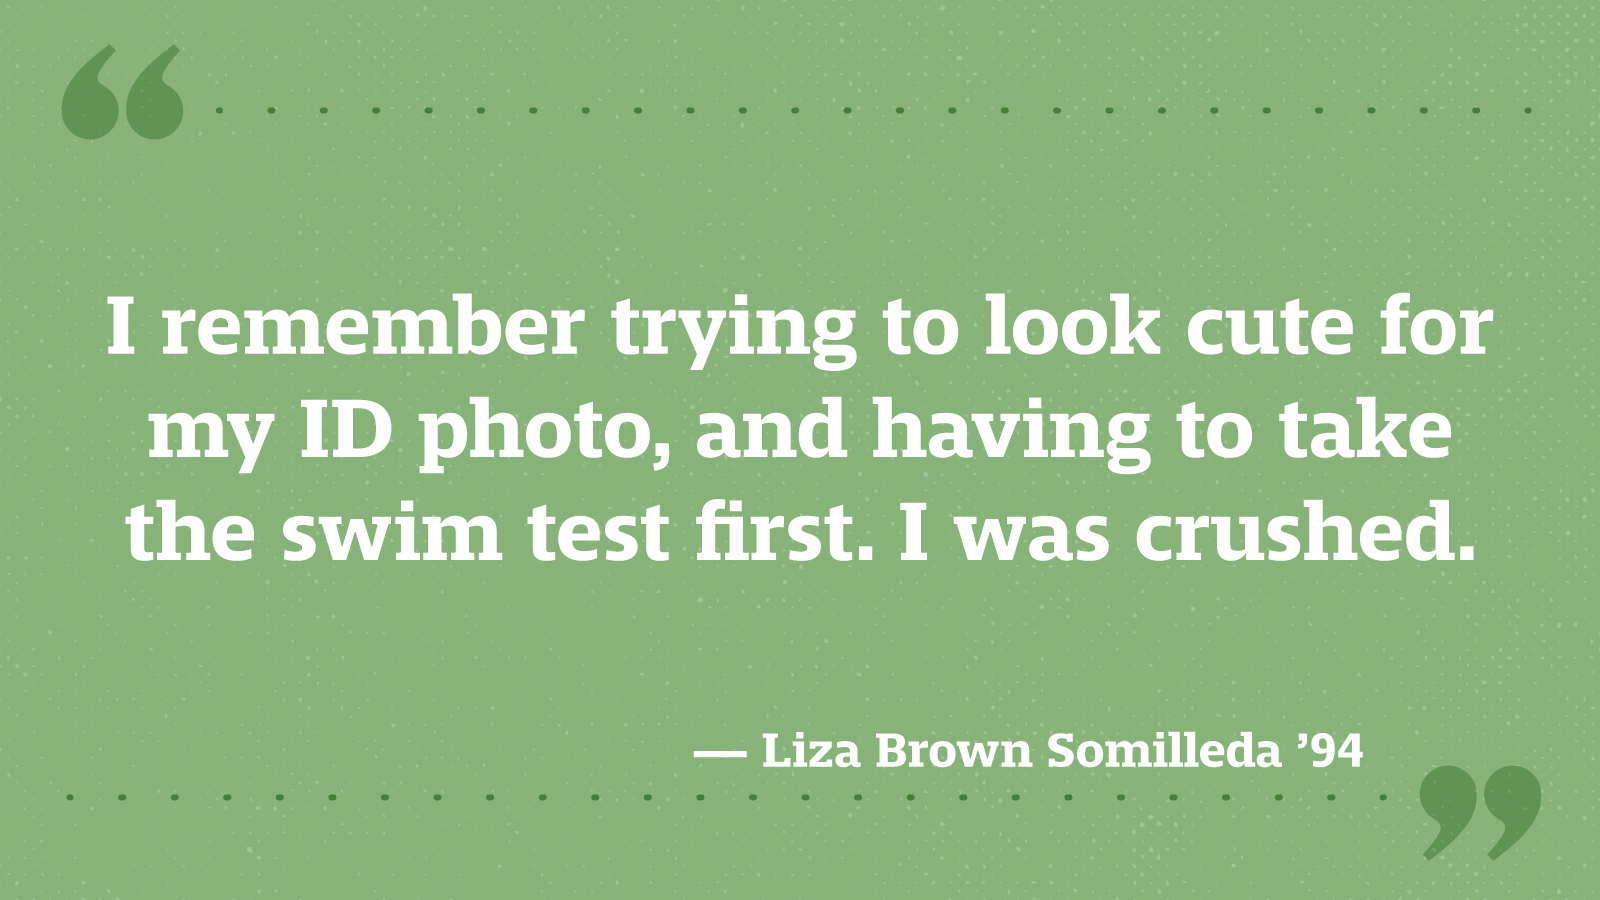 I remember trying to look cute for my ID photo, and having to take the swim test first. I was crushed. — Liza Brown Somilleda ’94